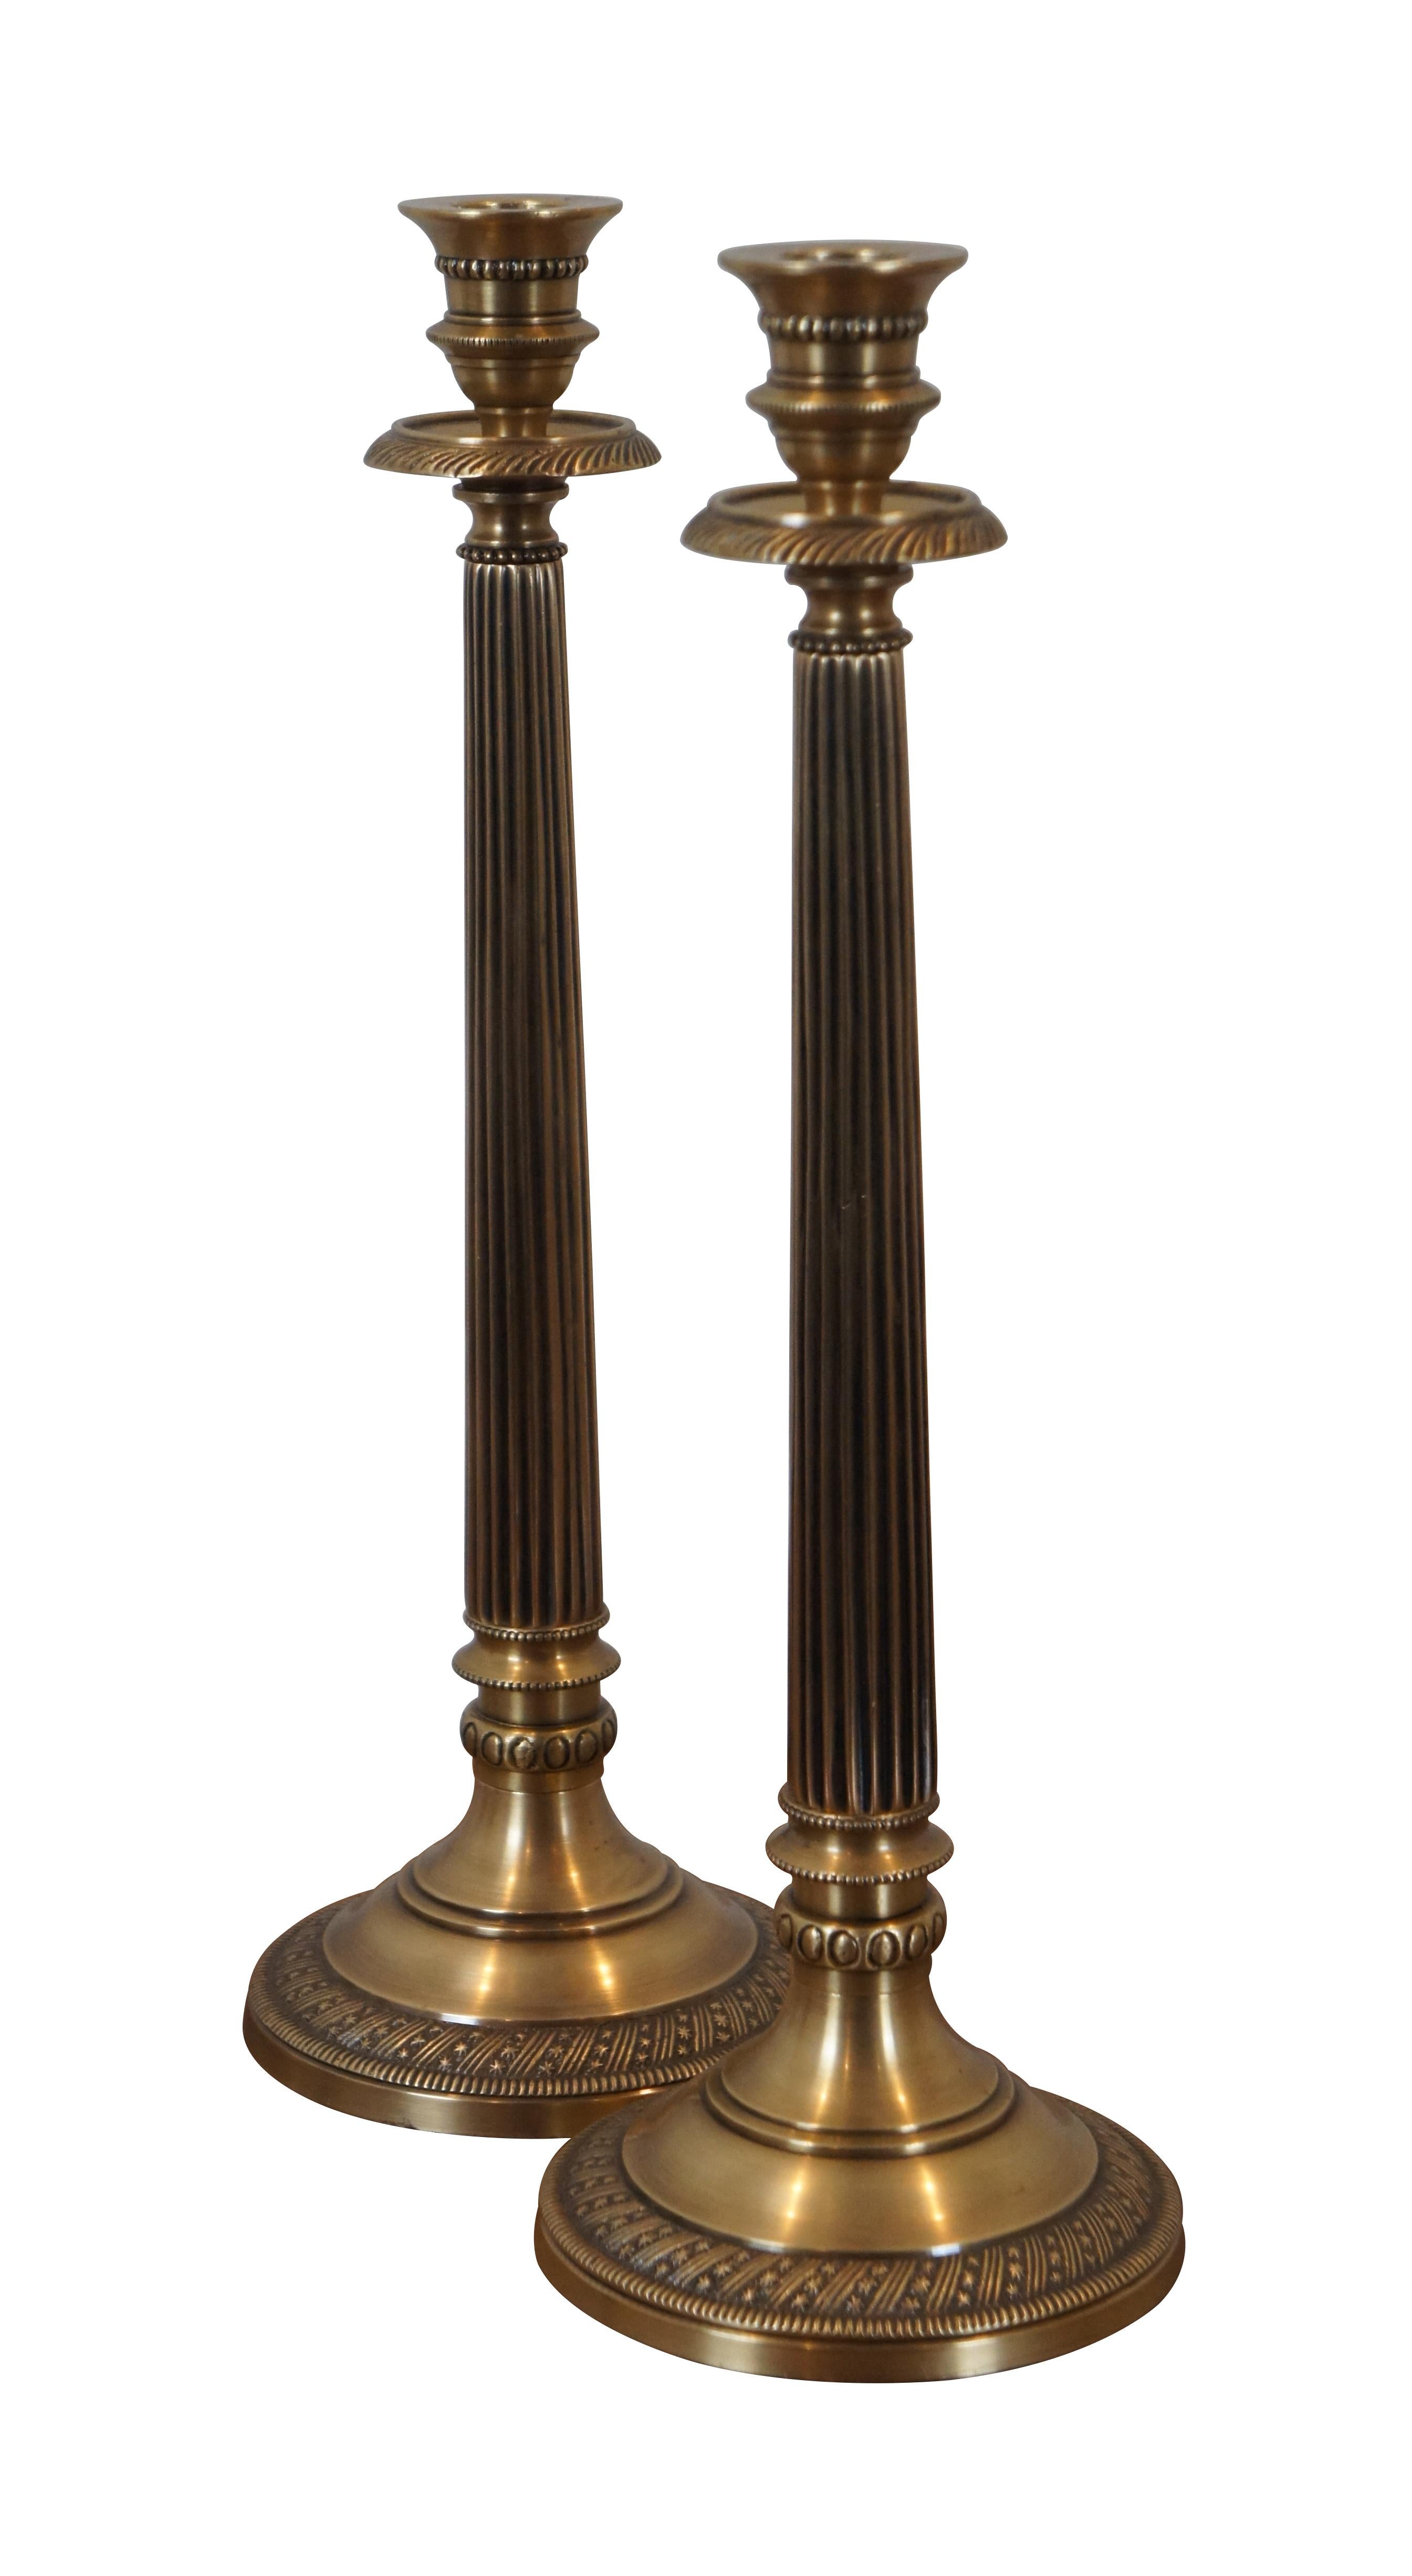 Pair of large vintage brass candlesticks / taper candle holders. In the shape of a neoclassically inspired fluted Corinthian column with beaded bands and a round base trimmed with a rope twist of alternating bands and stars.

Dimensions:
4.75” x